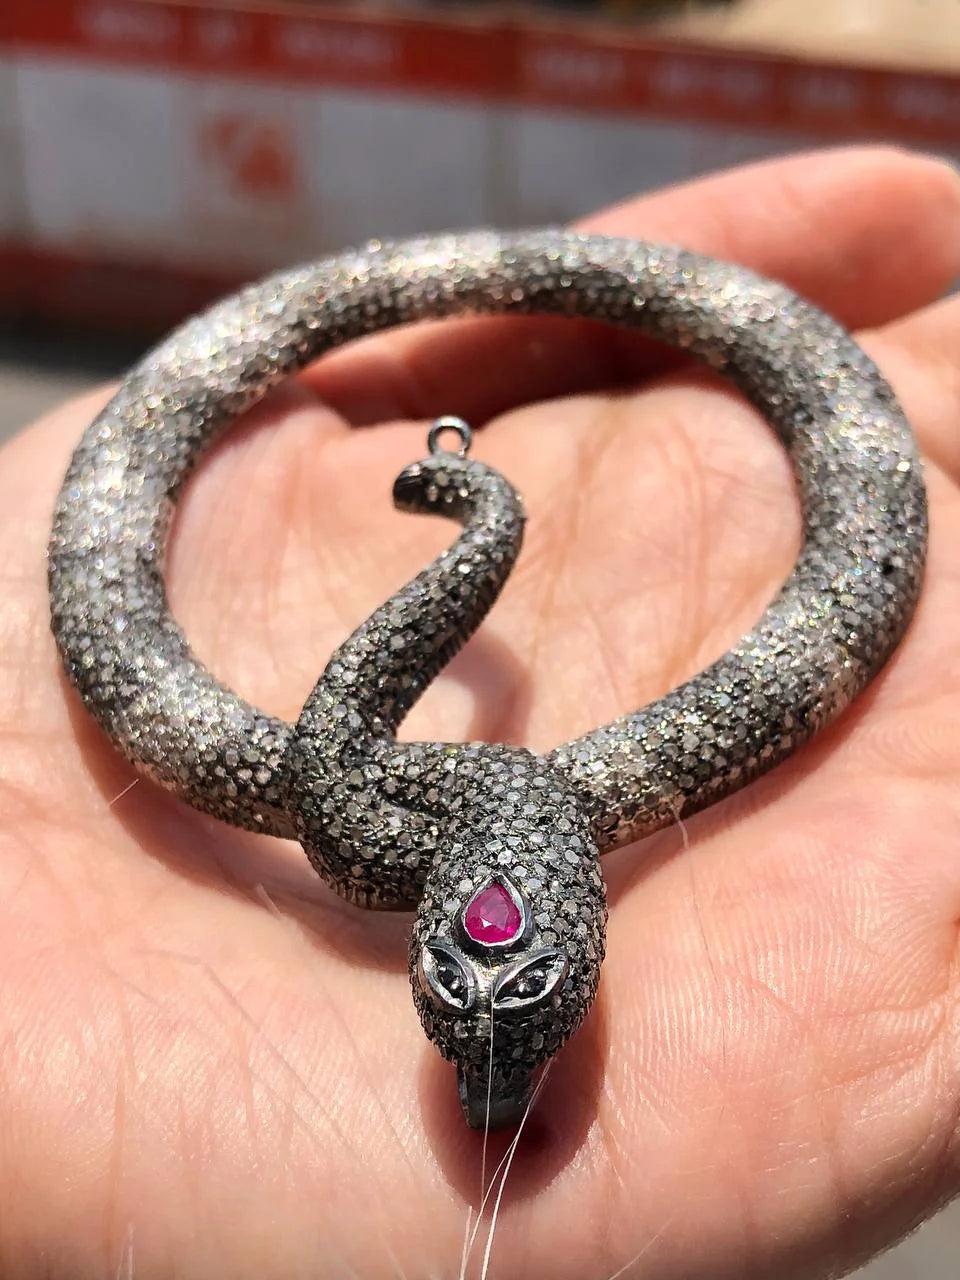 Stunning Snake Pendant Sterling Silver Delicated Vintage Statement Jewelry